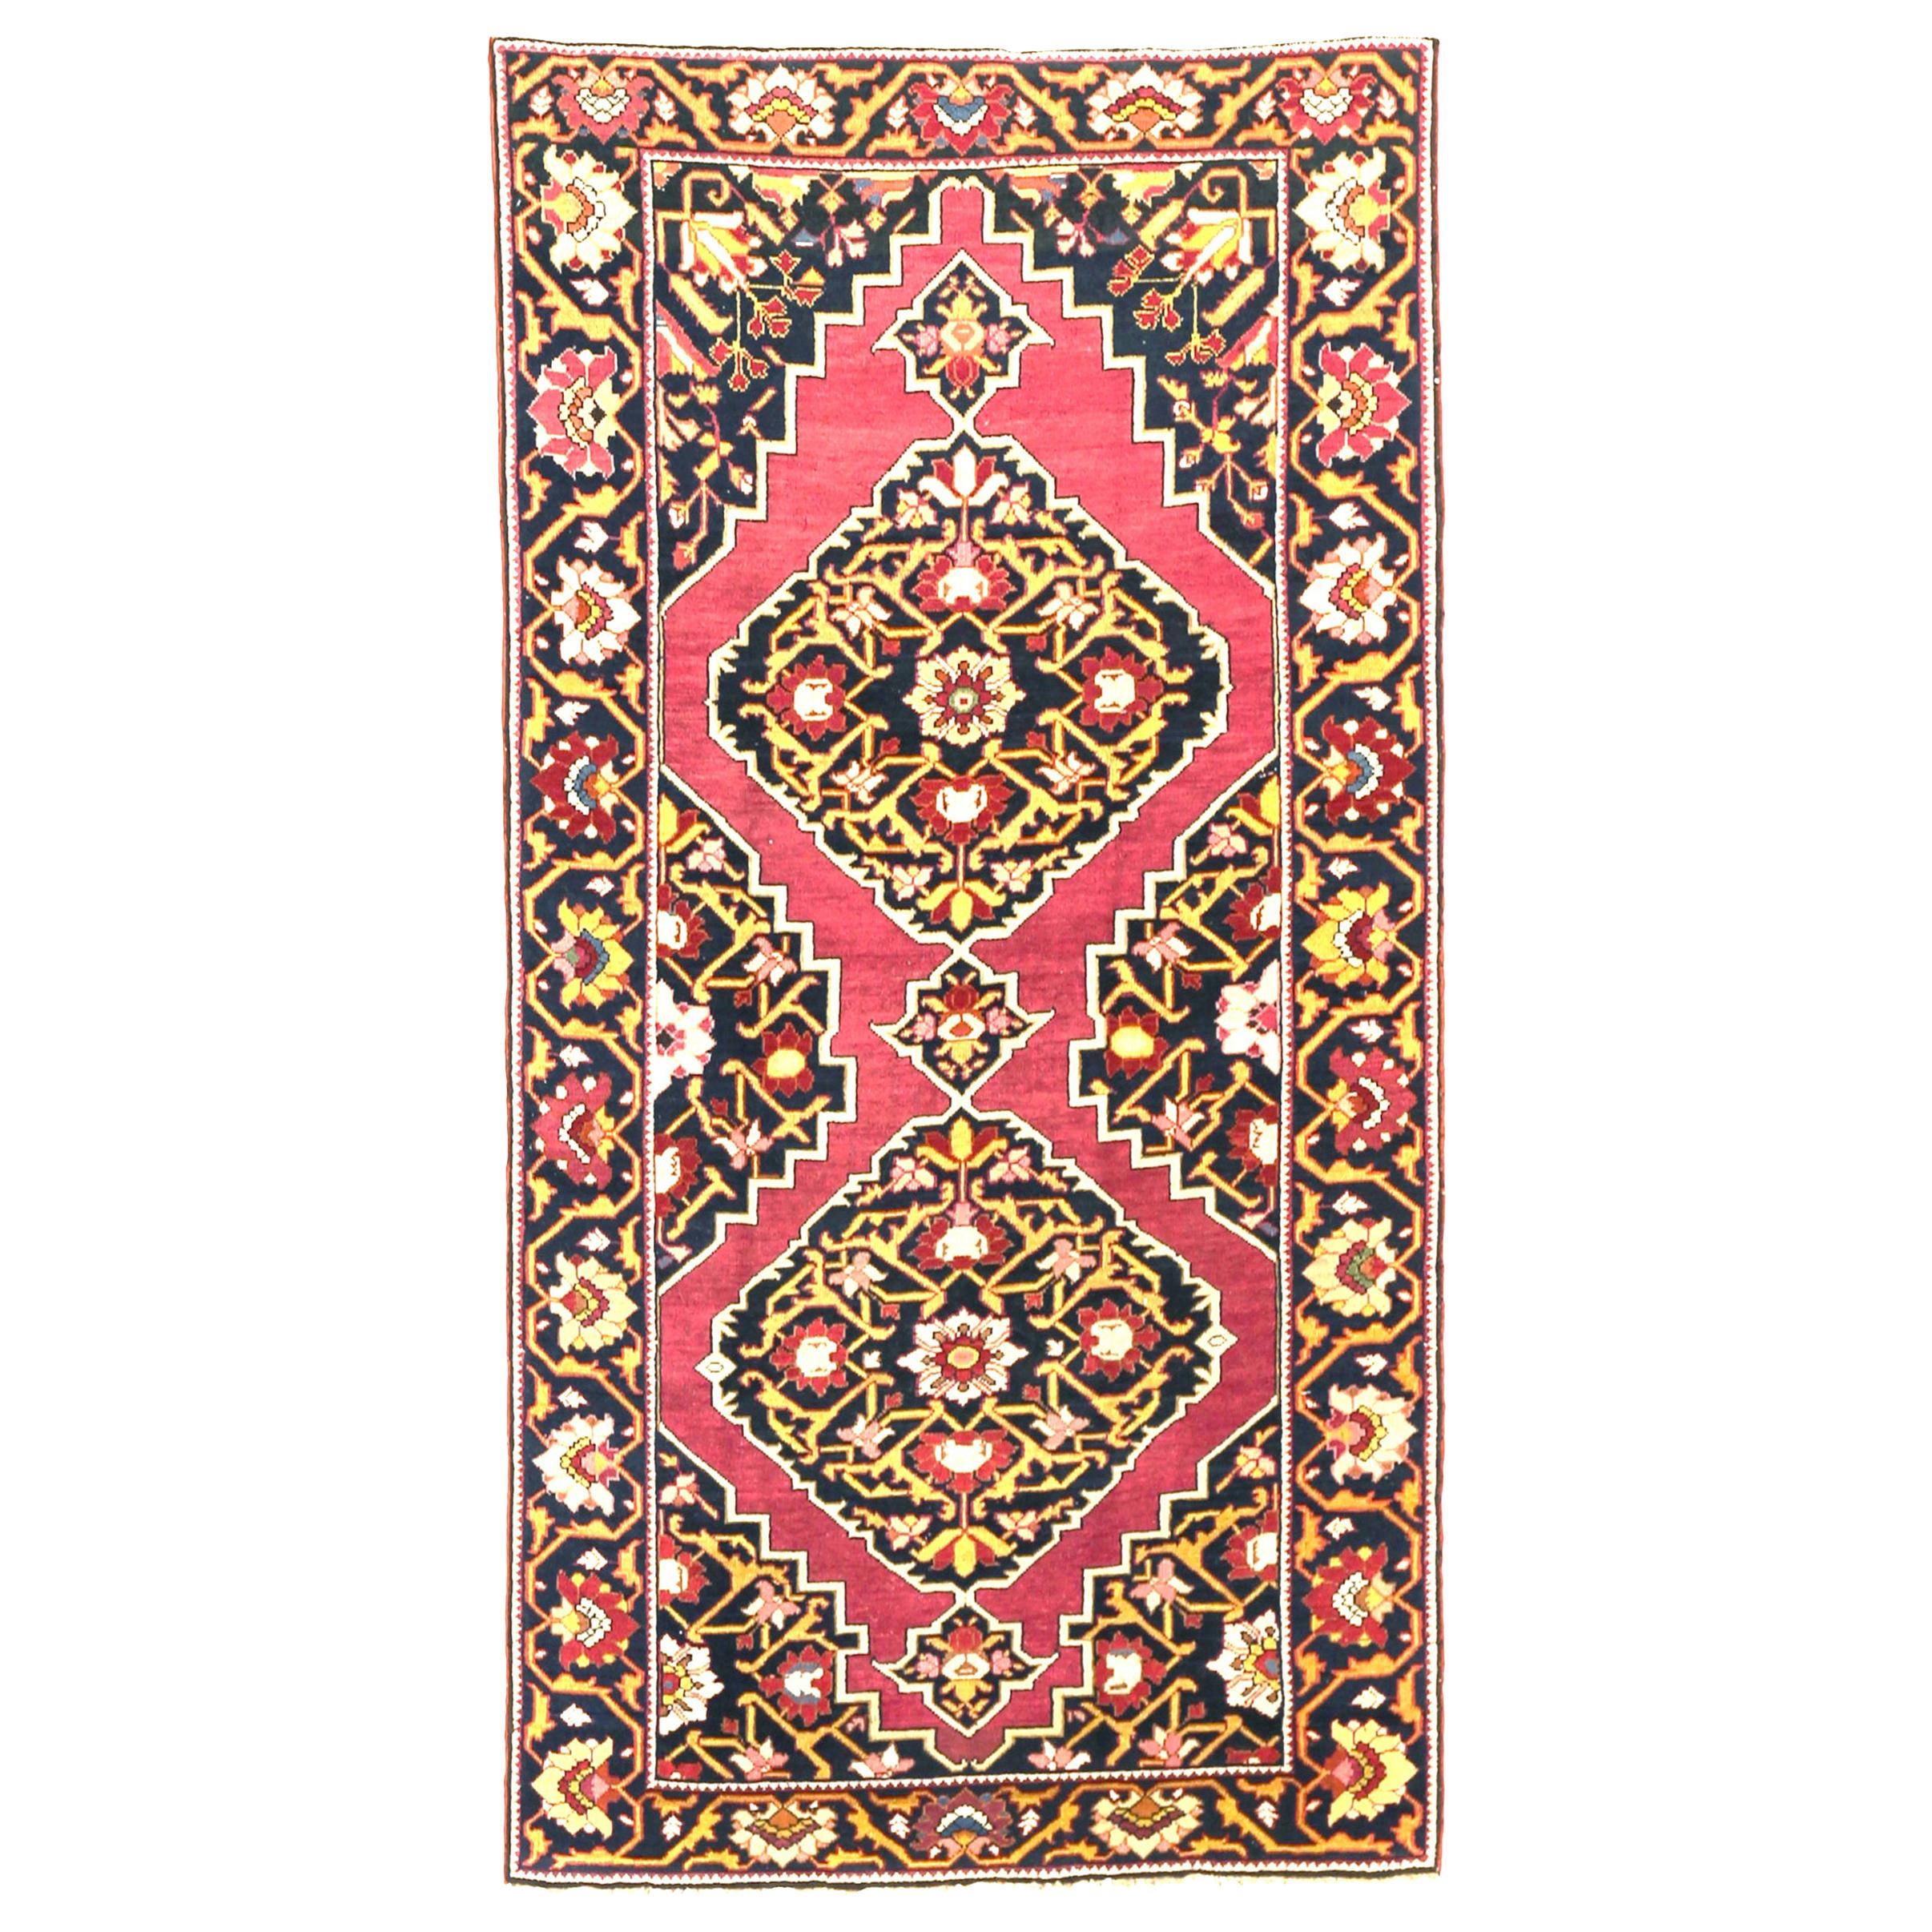 Antique Persian Azerbaijan Area Rug with Floral Pattern on a Black Field